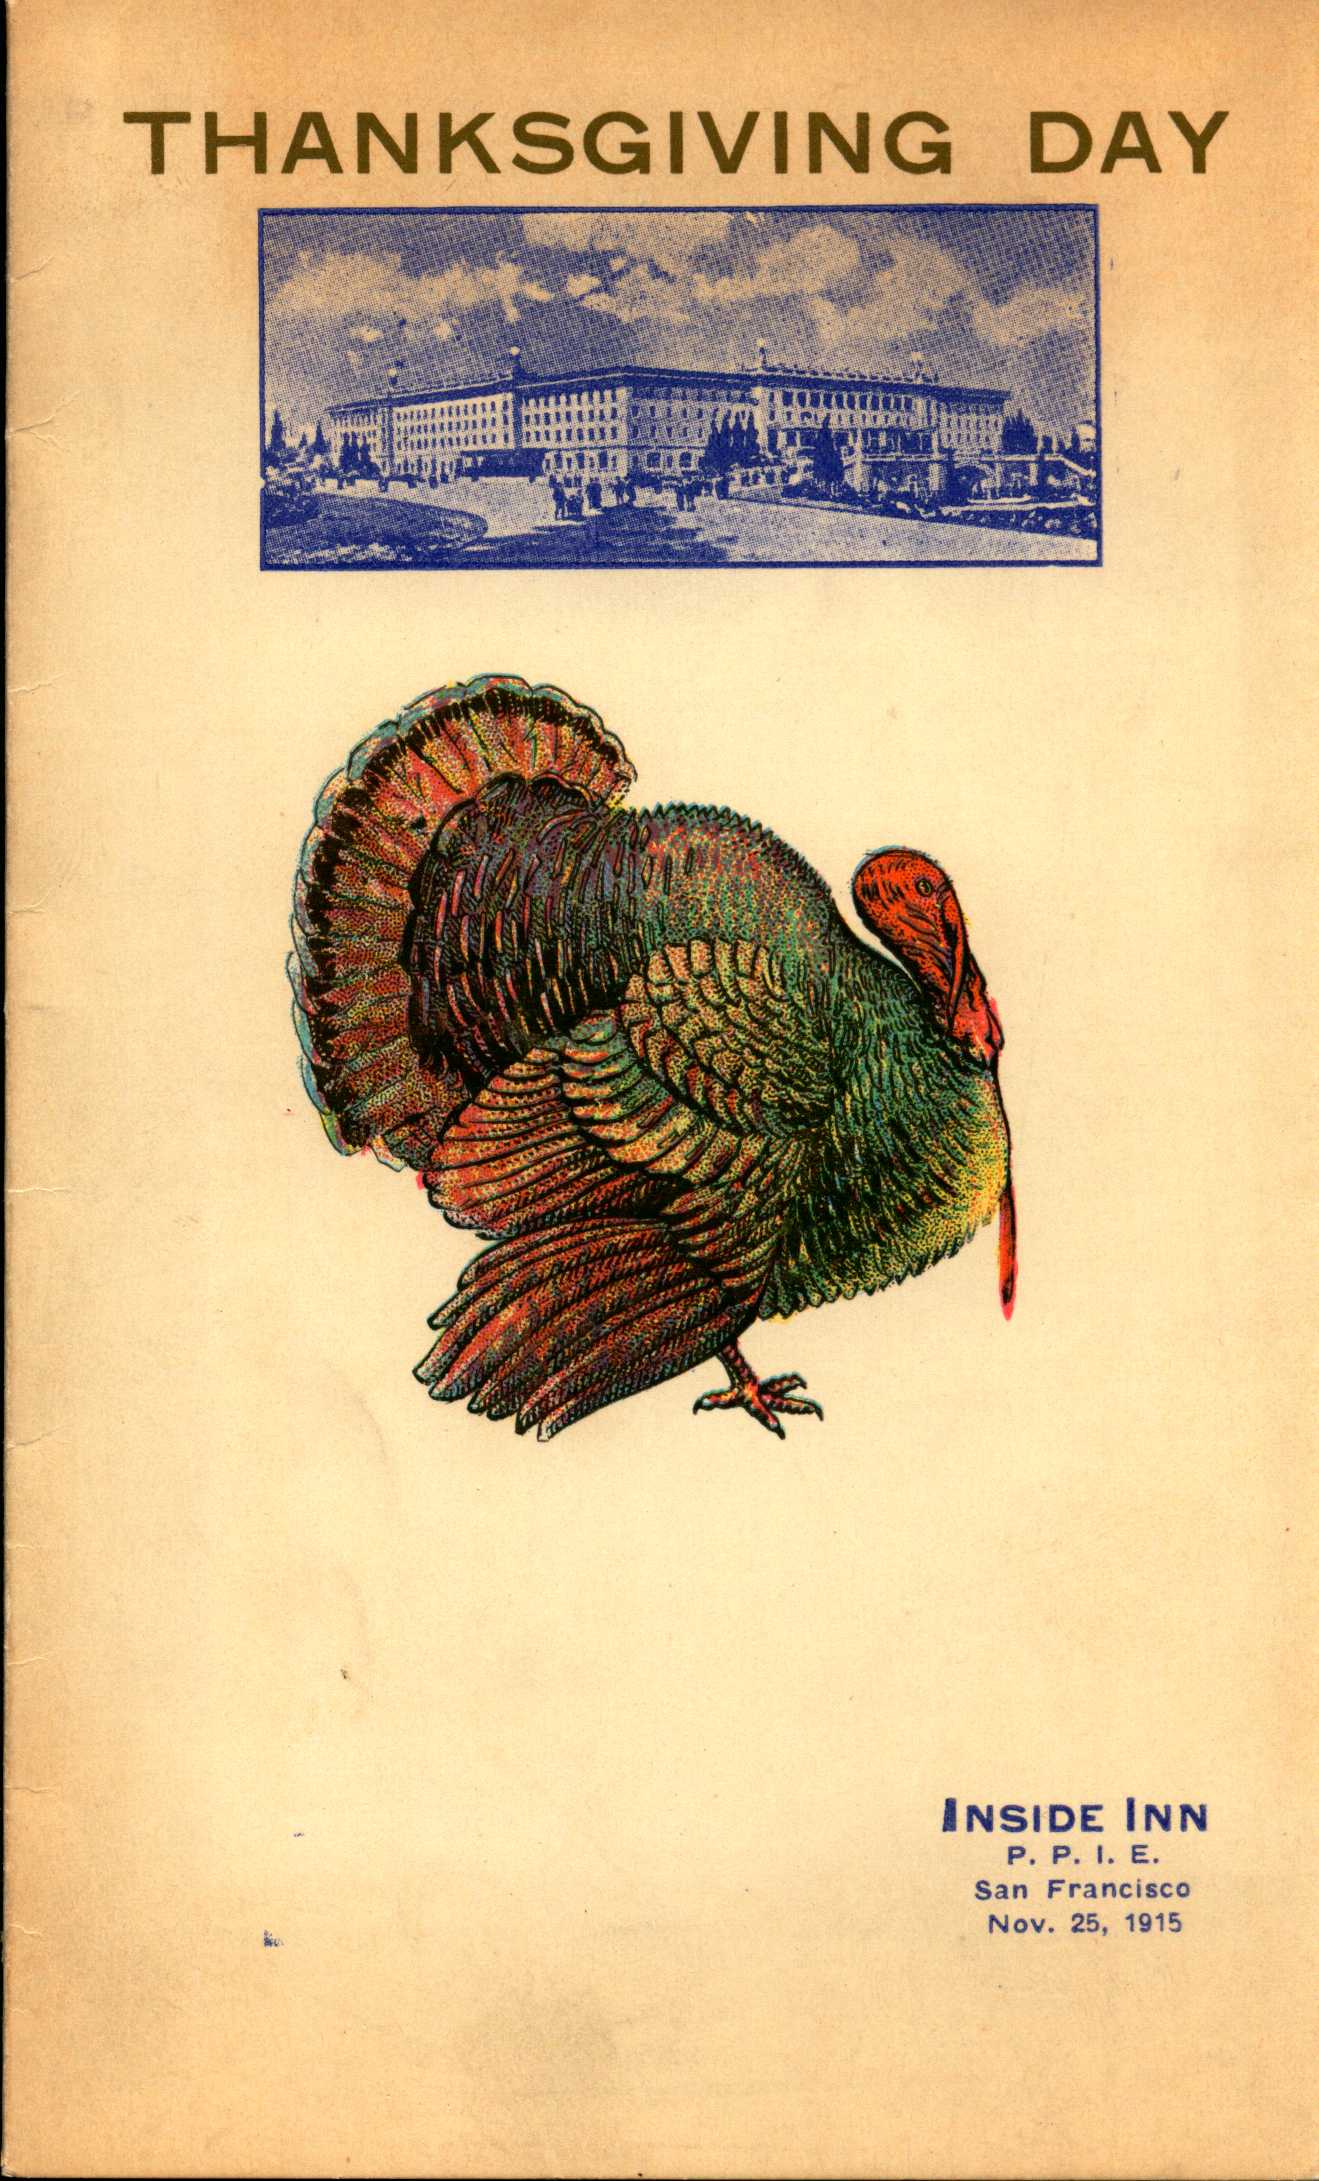 Menu covers shows a building and a turkey